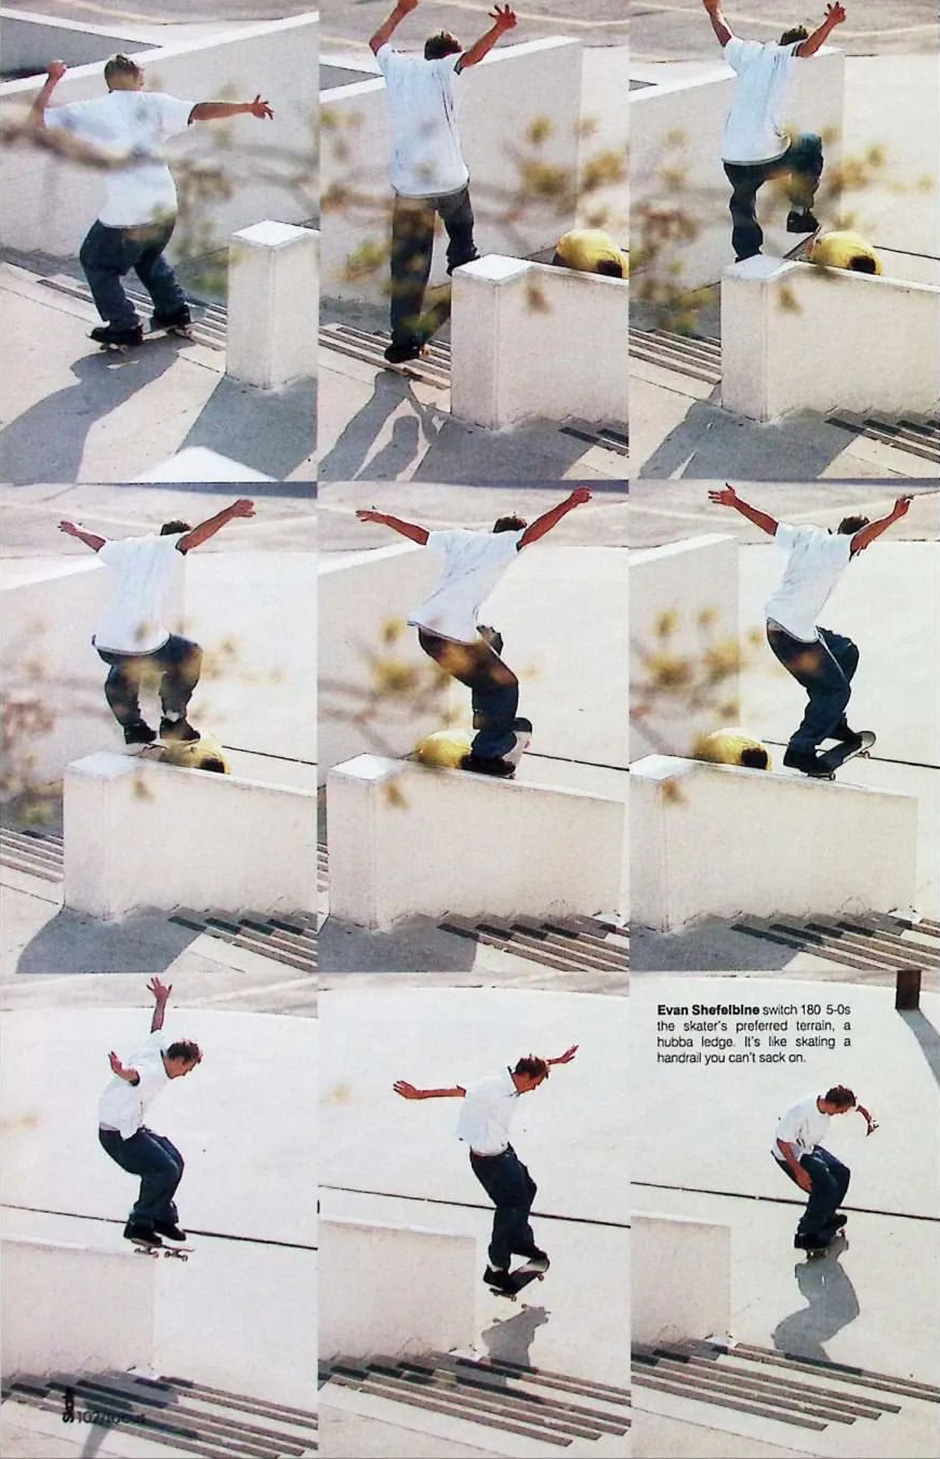 Evan Schiefelbineswitch frontsdie 180's to frontside 5-0 for Seu Trinh's lens